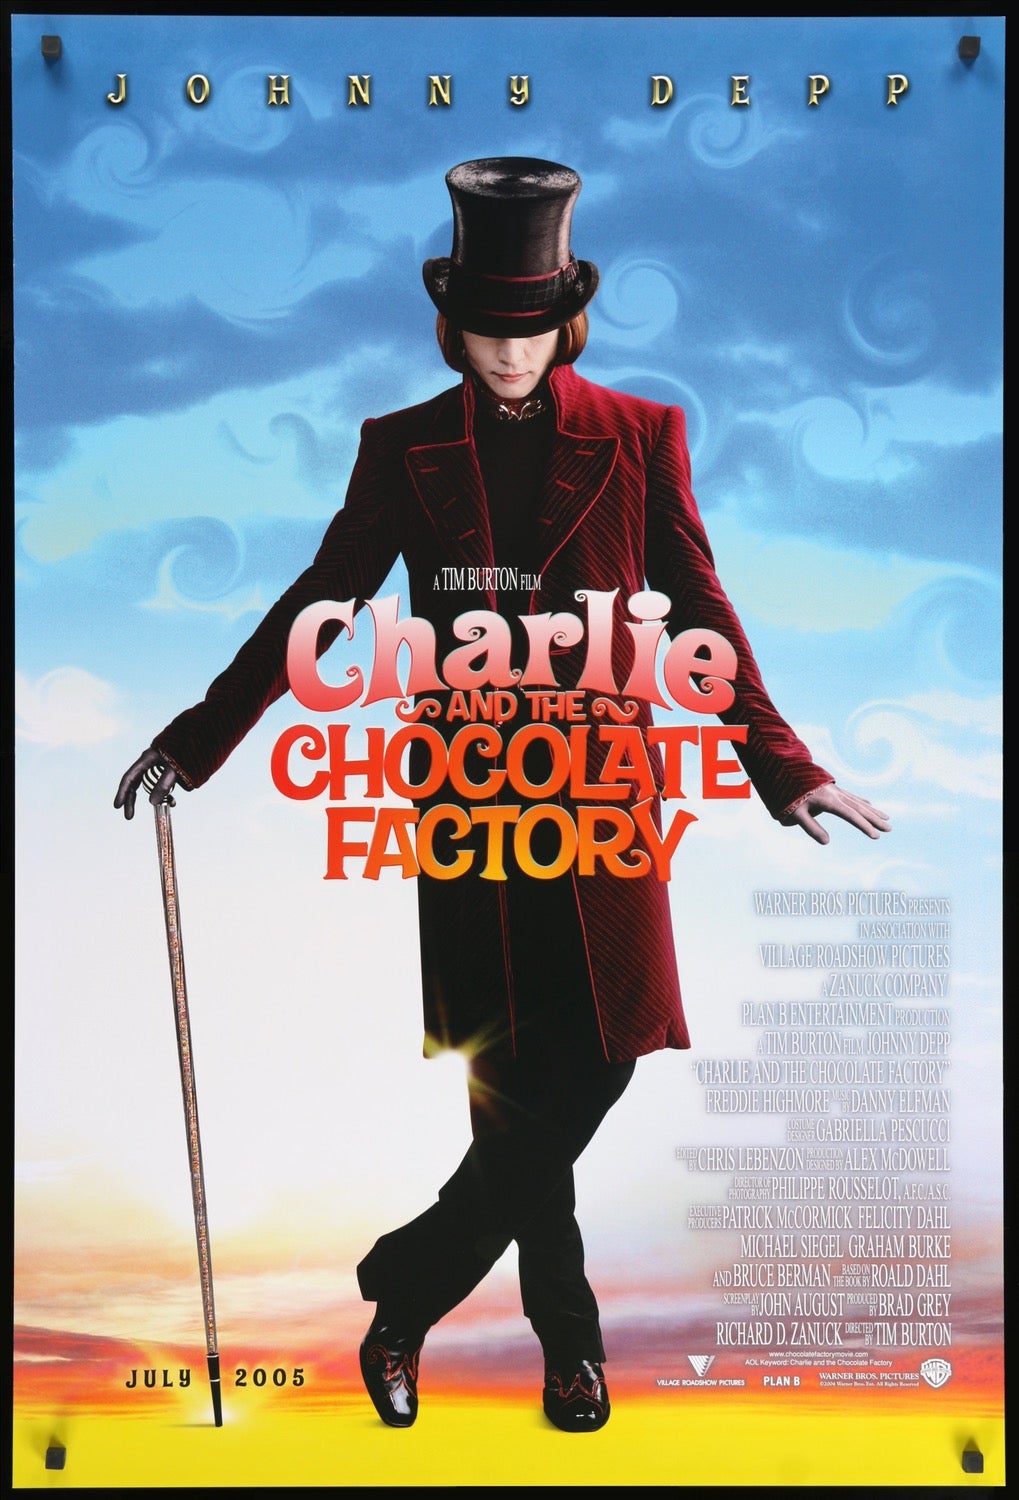 Willy Wonka & the Chocolate Factory / Charlie and the Chocolate Factory  2-Film Collection (Blu-ray)(2011)